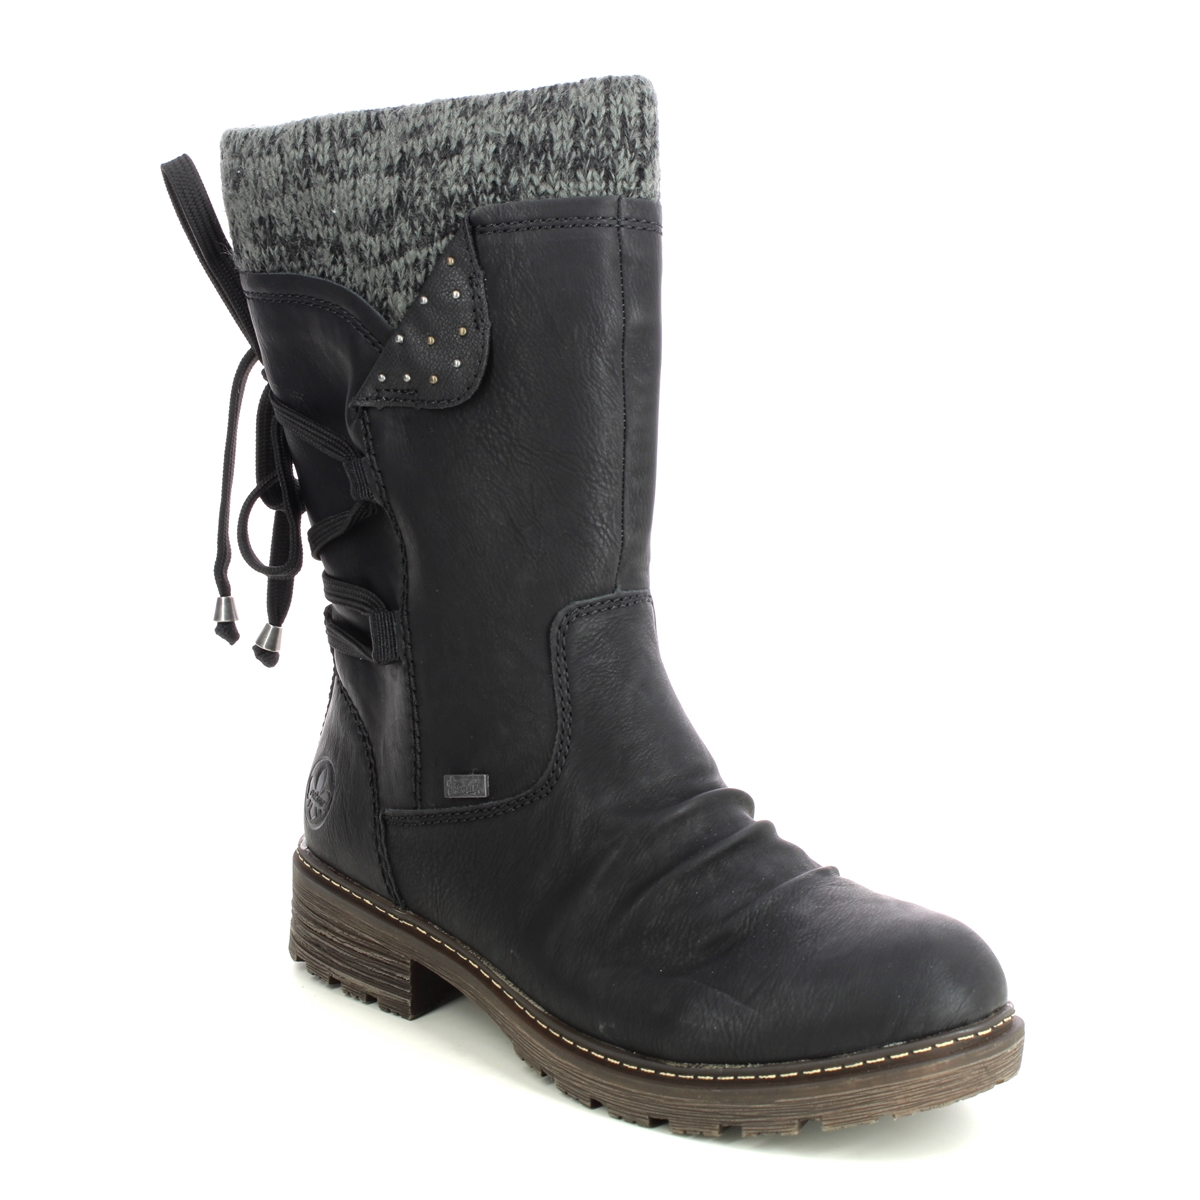 Rieker Z4773-01 Black Womens Mid Calf Boots in a Plain Man-made in Size 40